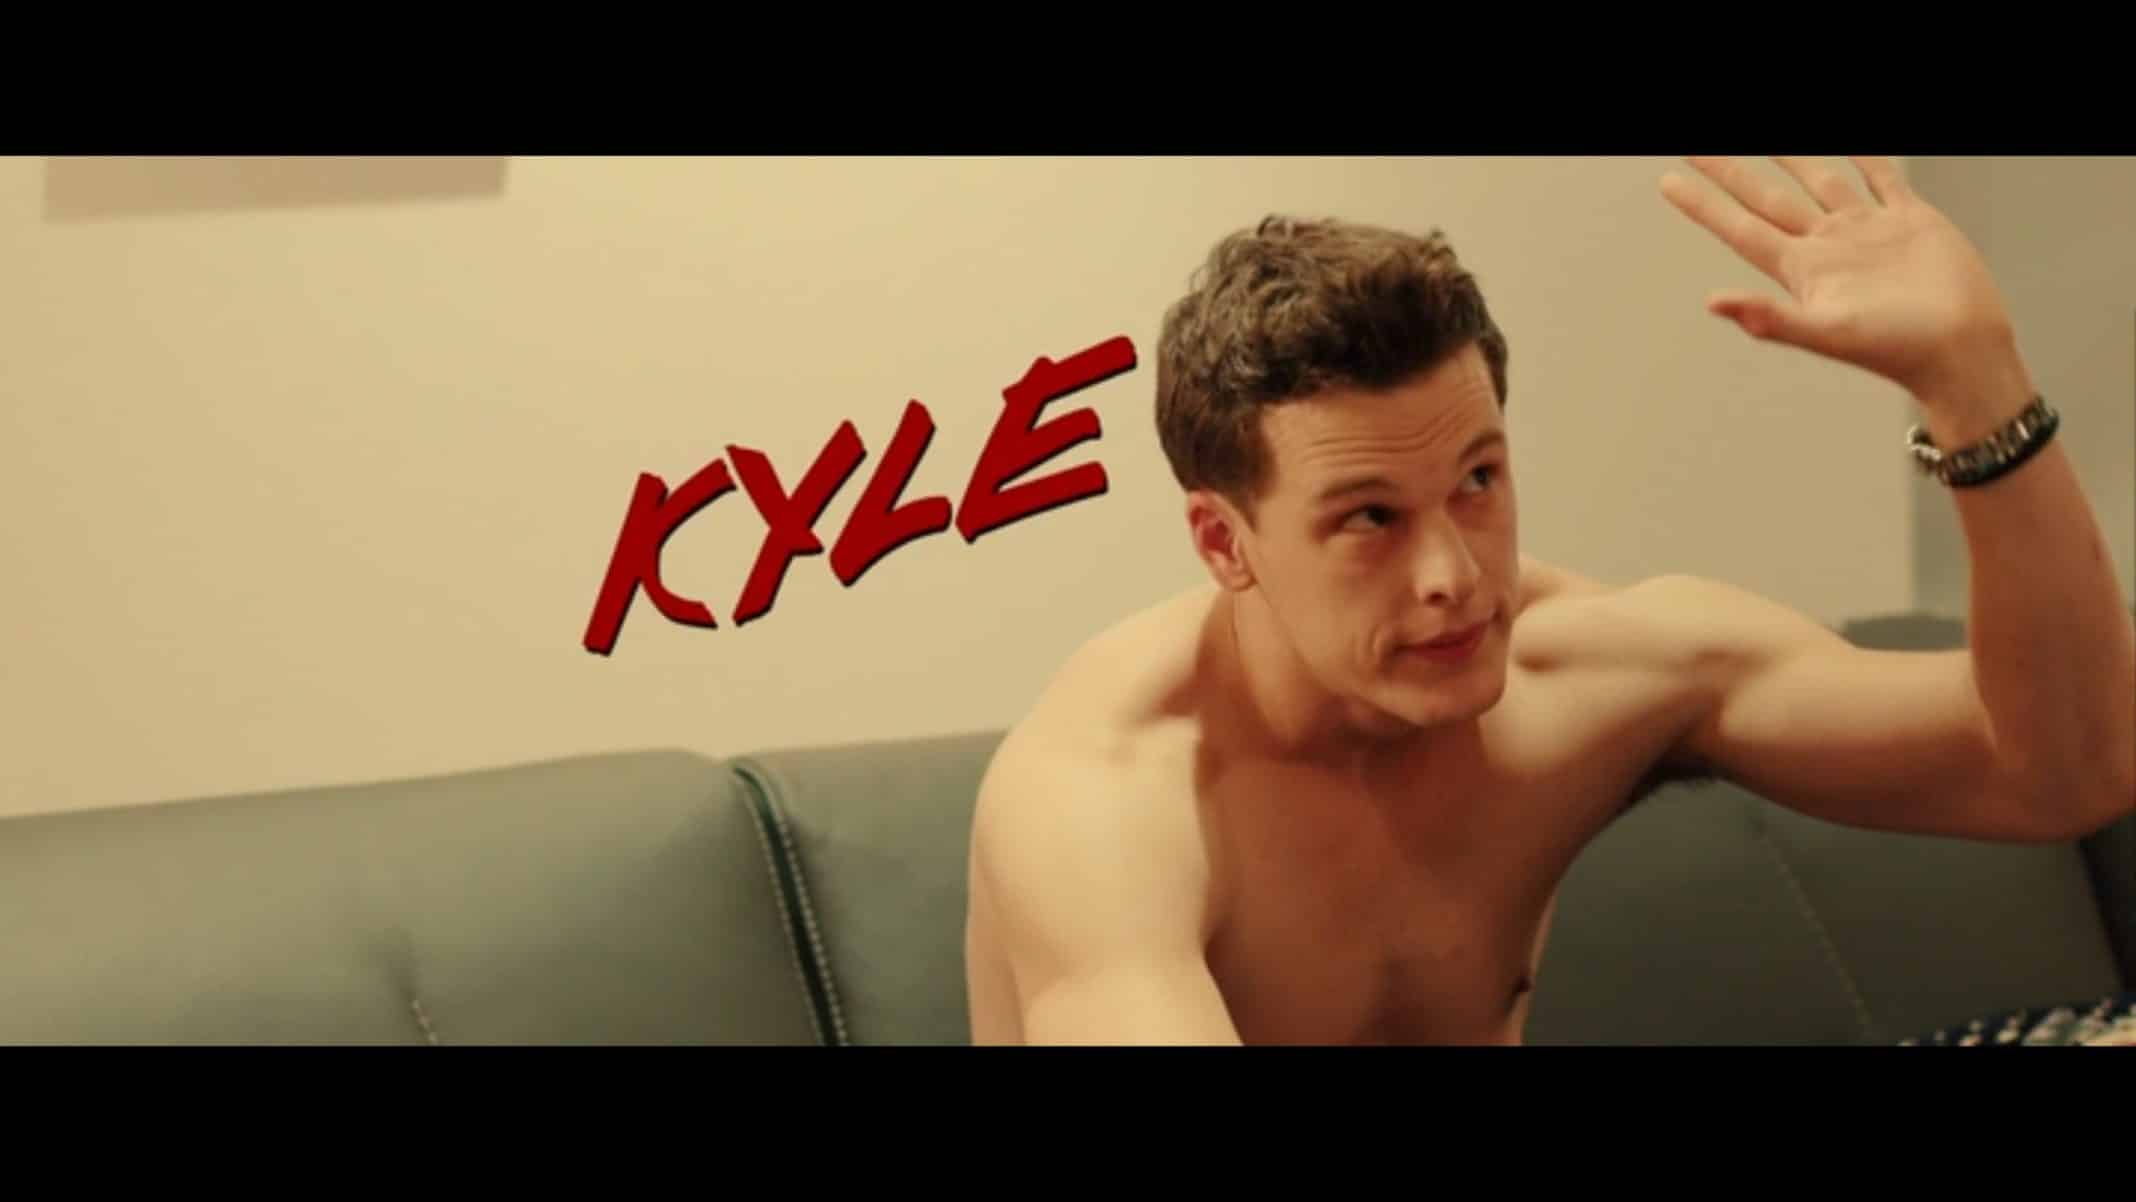 Kyle (Grant Harvey) sitting on a couch, with his shirt off.